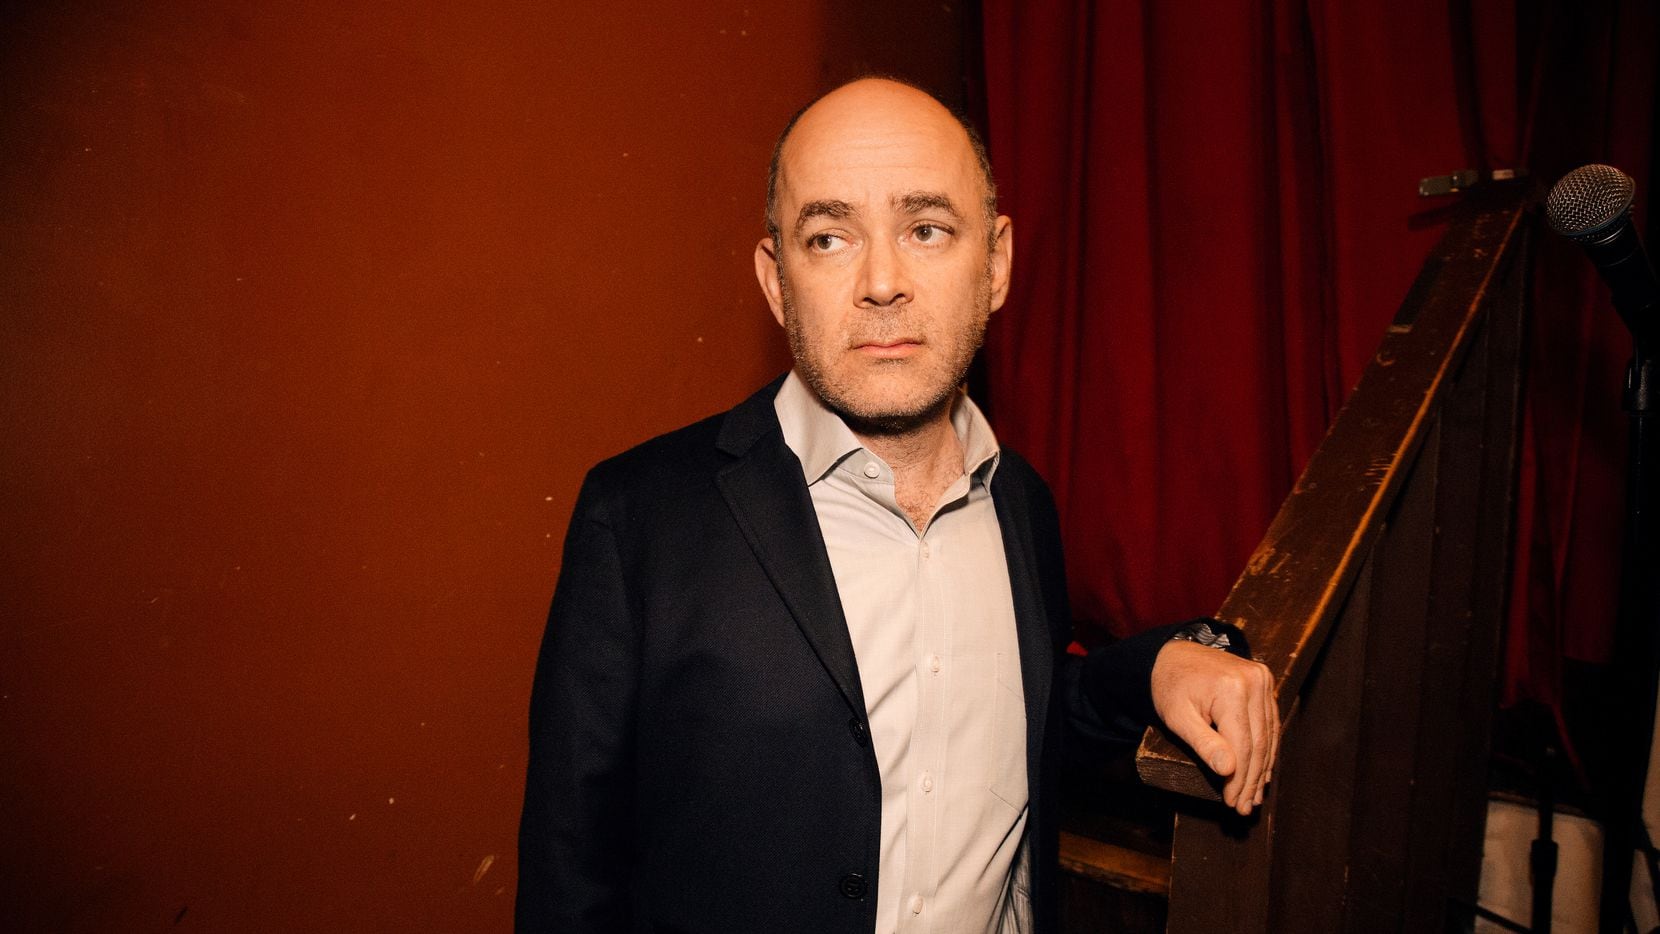 Comedian Todd Barry will perform at Dallas' Texas Theatre on his “Stadium Tour” on Feb. 29.